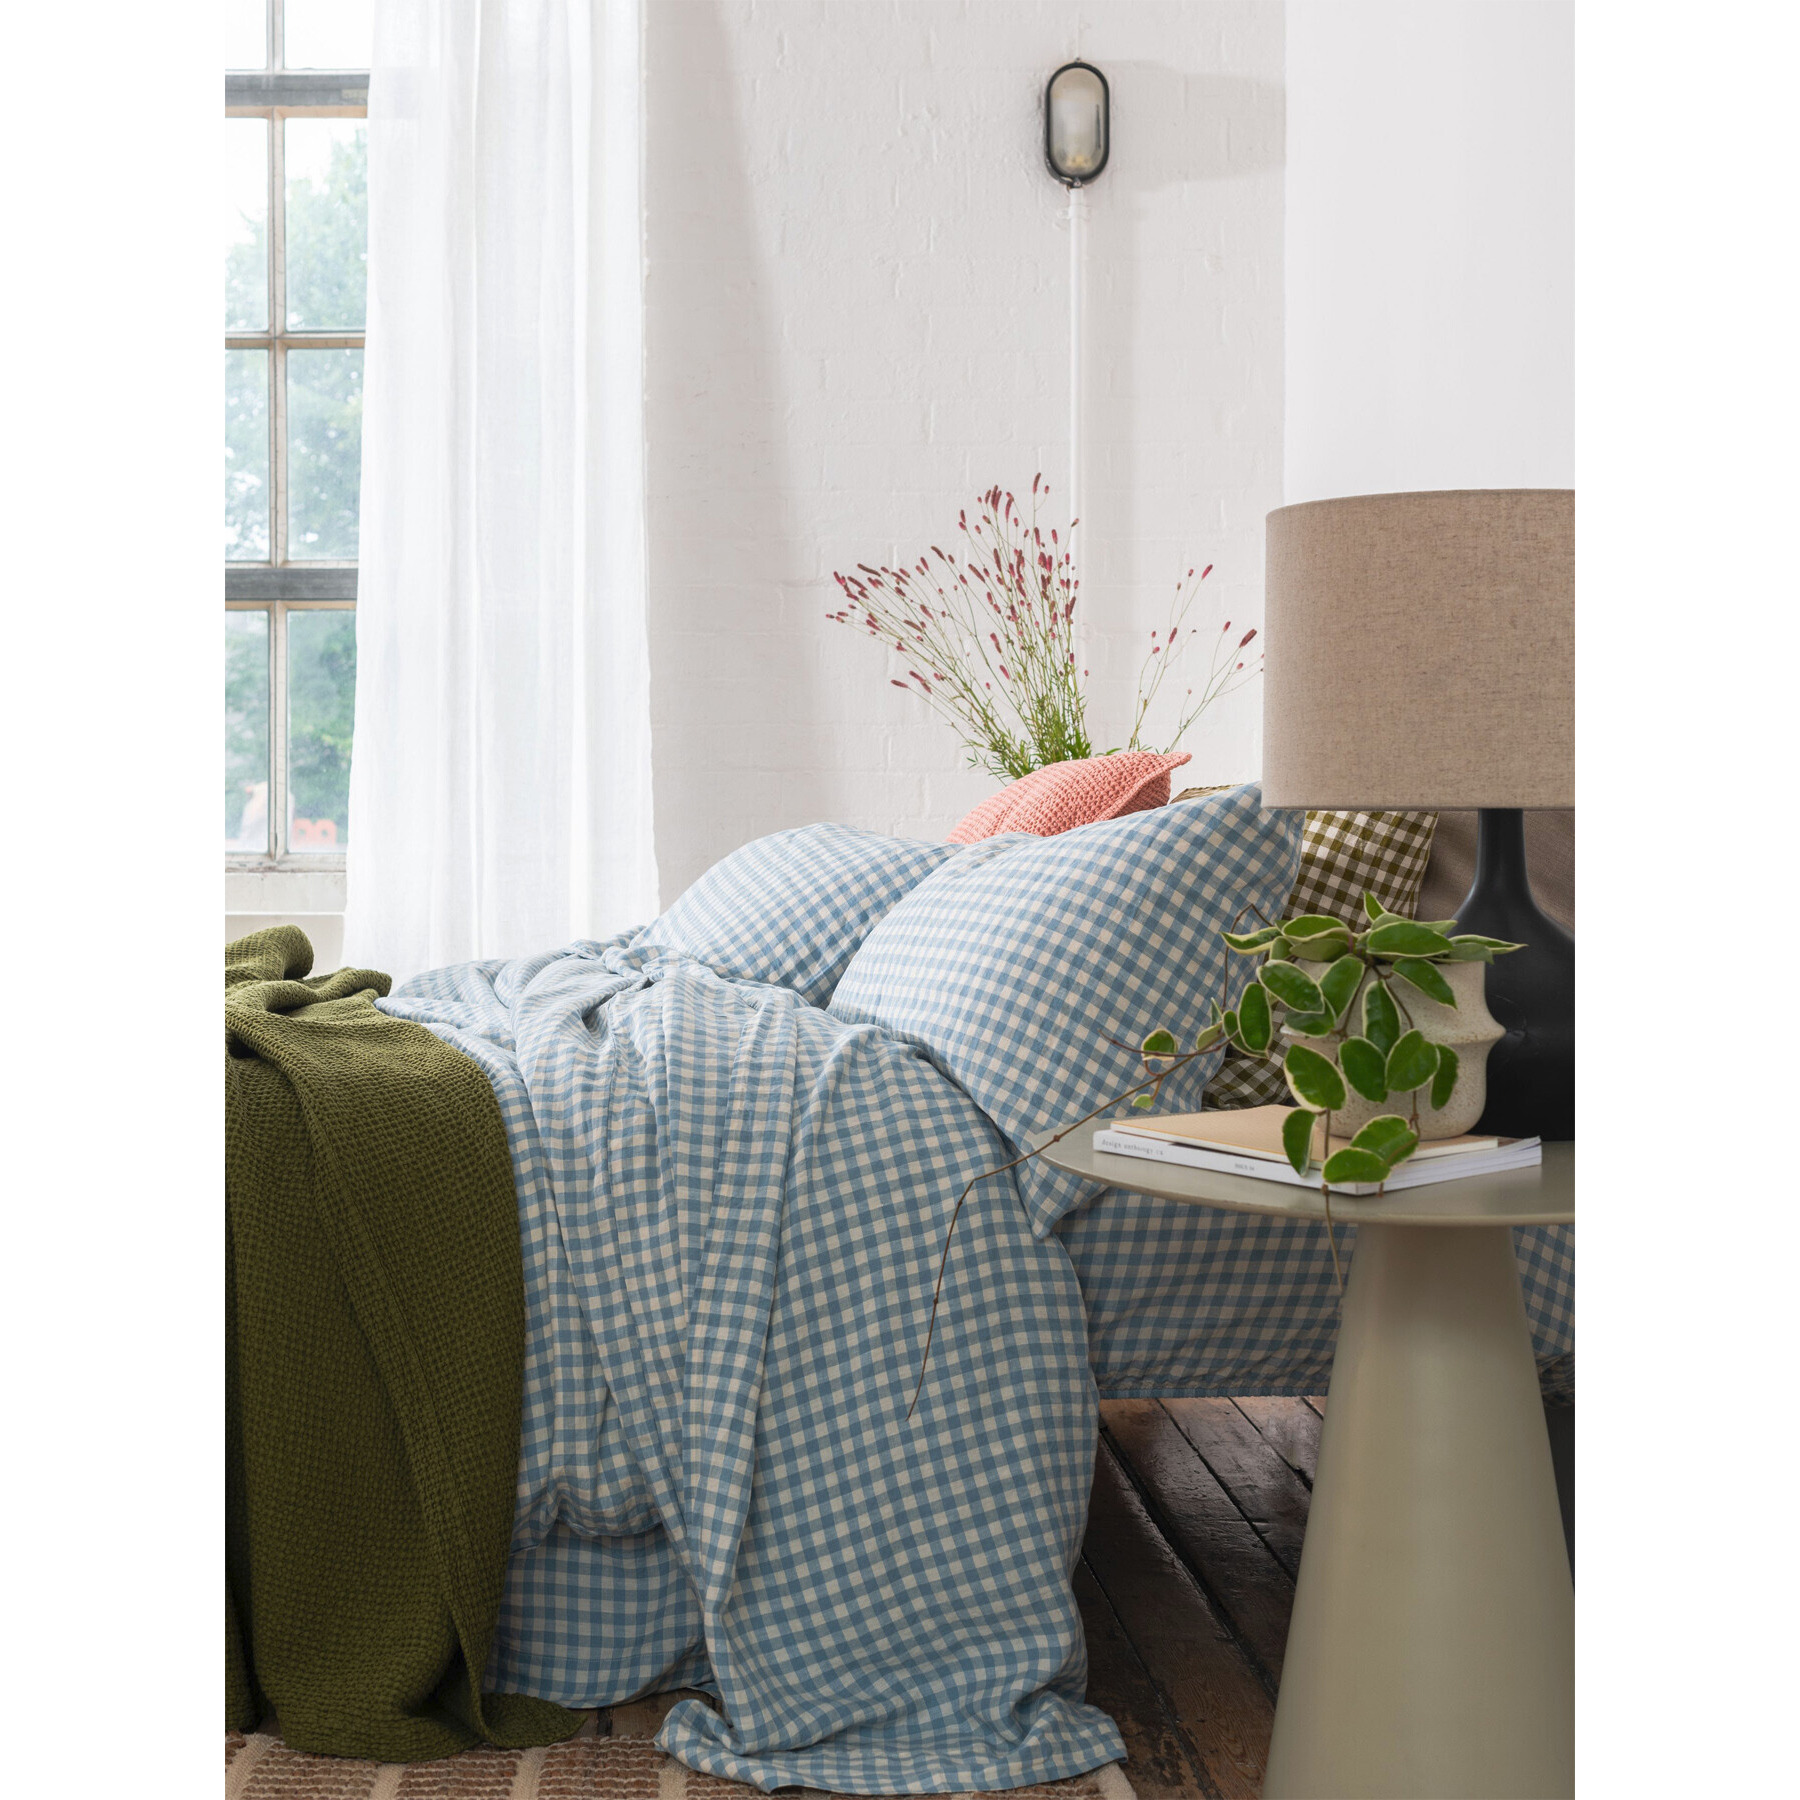 Piglet in Bed Gingham Linen Flat Sheet - Size Double Blue - image 1